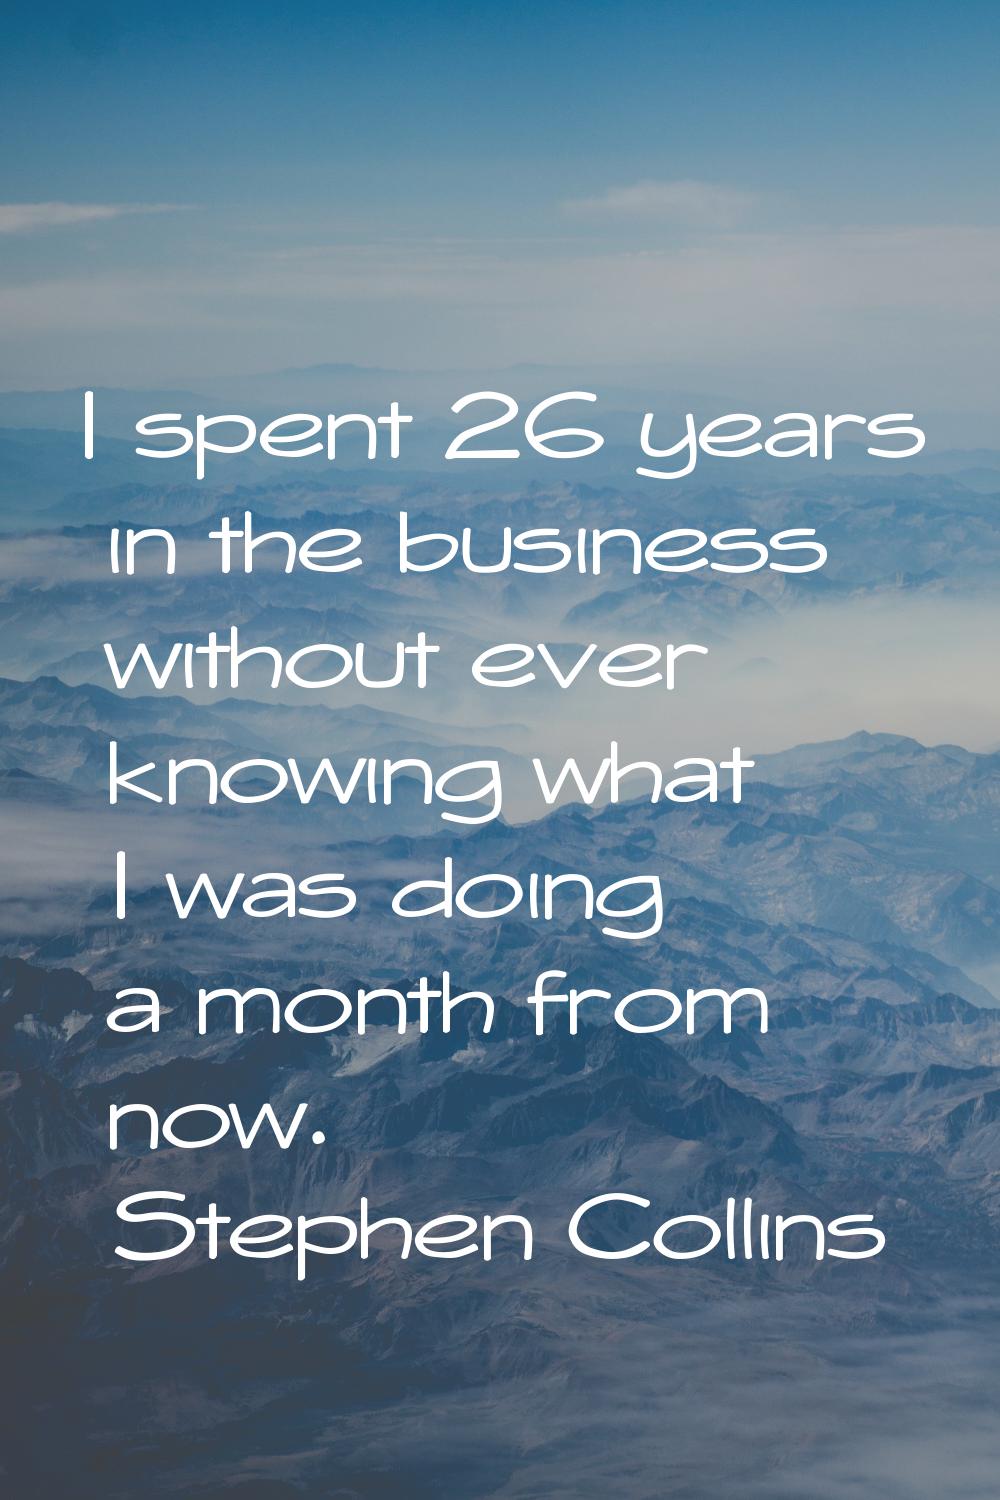 I spent 26 years in the business without ever knowing what I was doing a month from now.